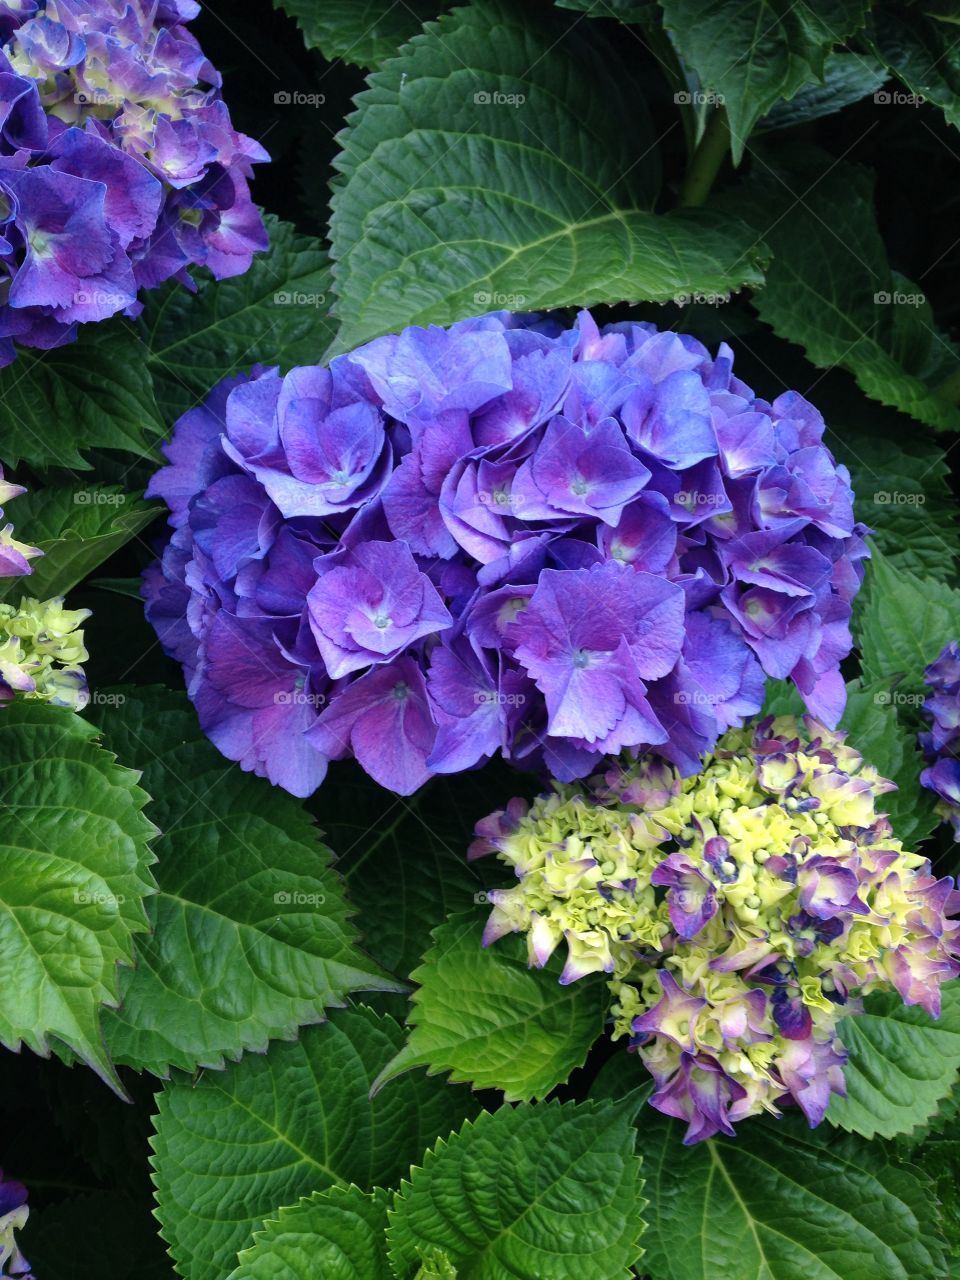 Hydrangeas of the Pacific NW